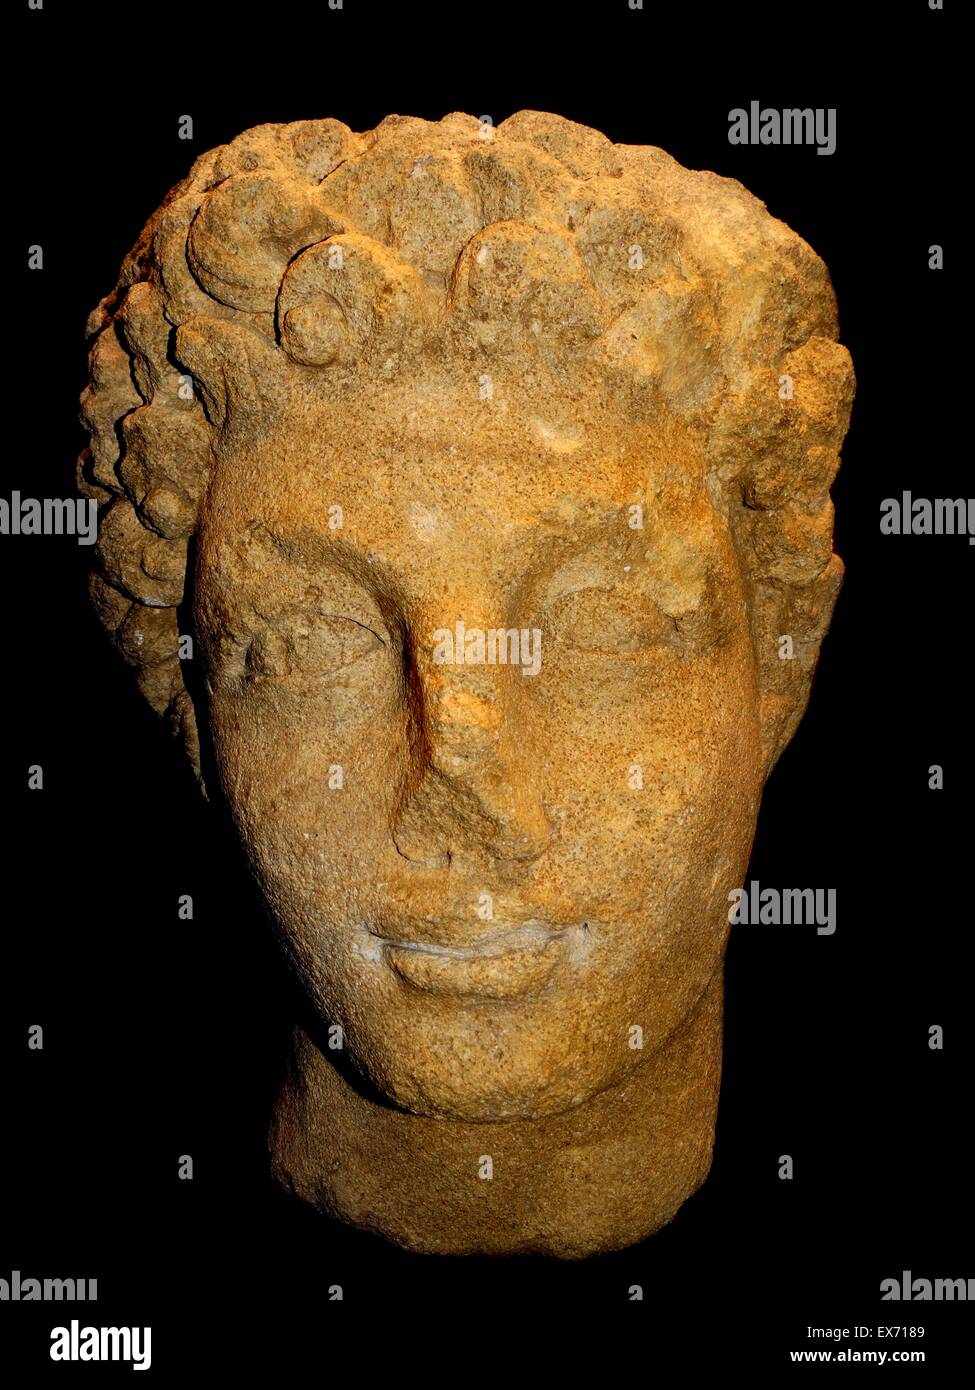 The Uley Mercury, Roman Britain, 2nd century AD. From Uley, Gloucestershire. cult-statue of the god Mercury which stood in the Uley temple. found in the 1979 season of work, had been carefully buried in the post-Roman phase of the buildings. Stock Photo